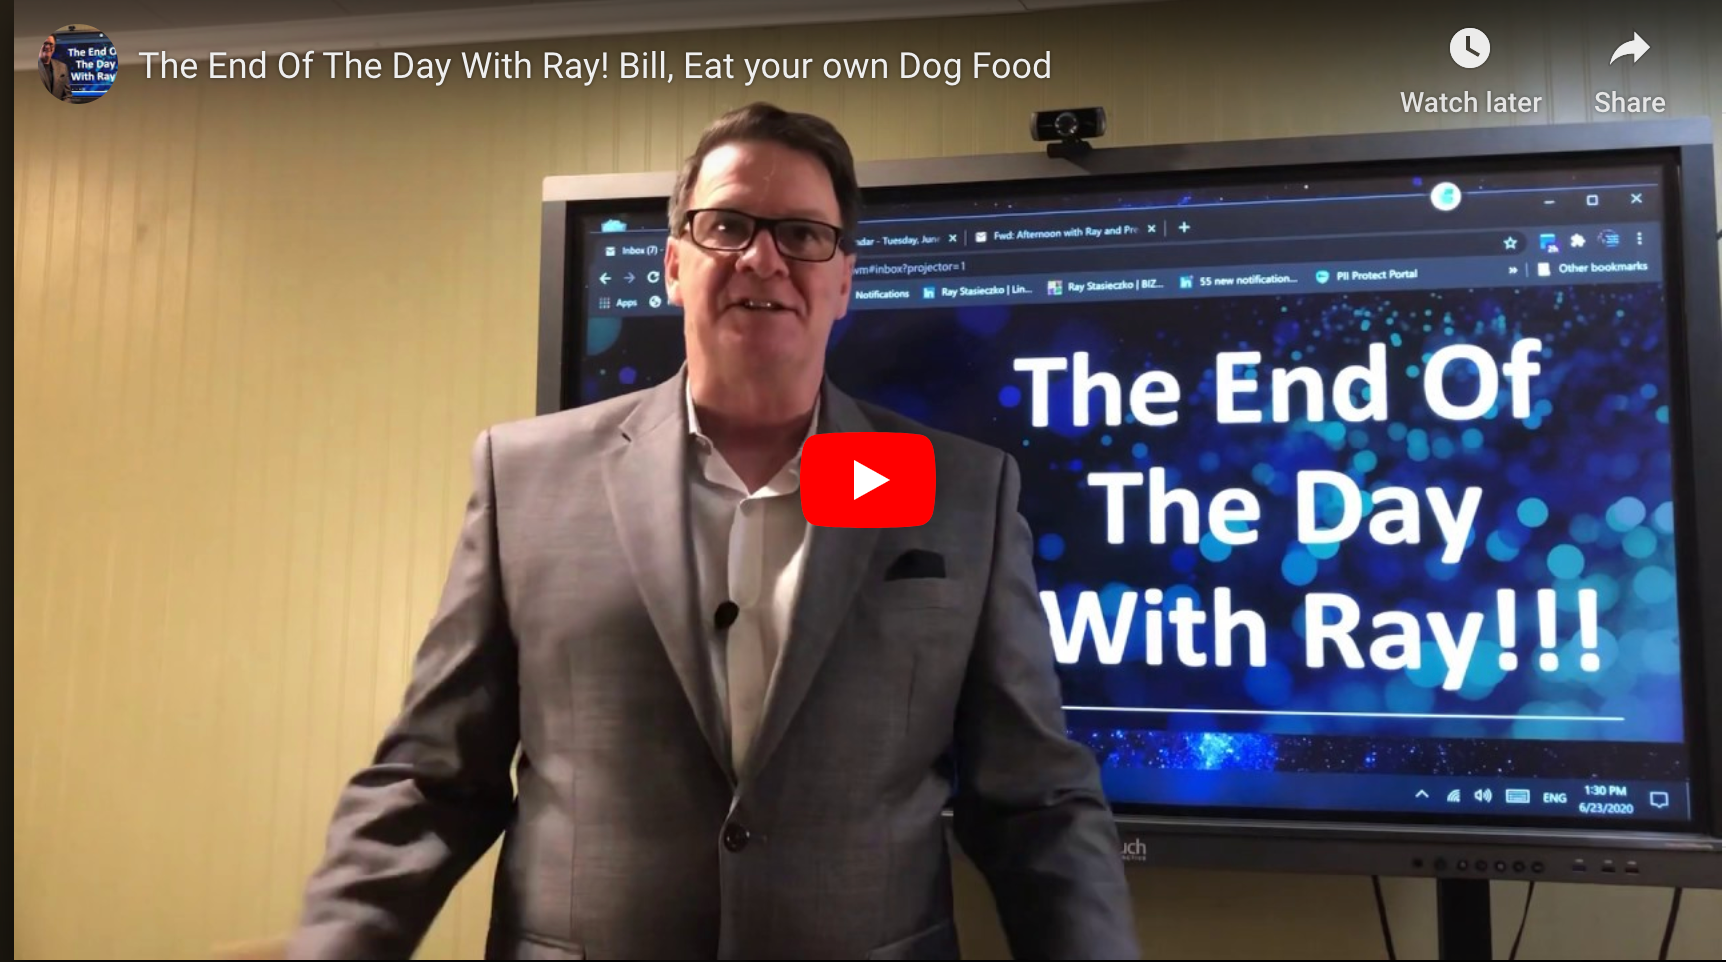 The End Of The Day With Ray! Bill, Eat your own Dog Food